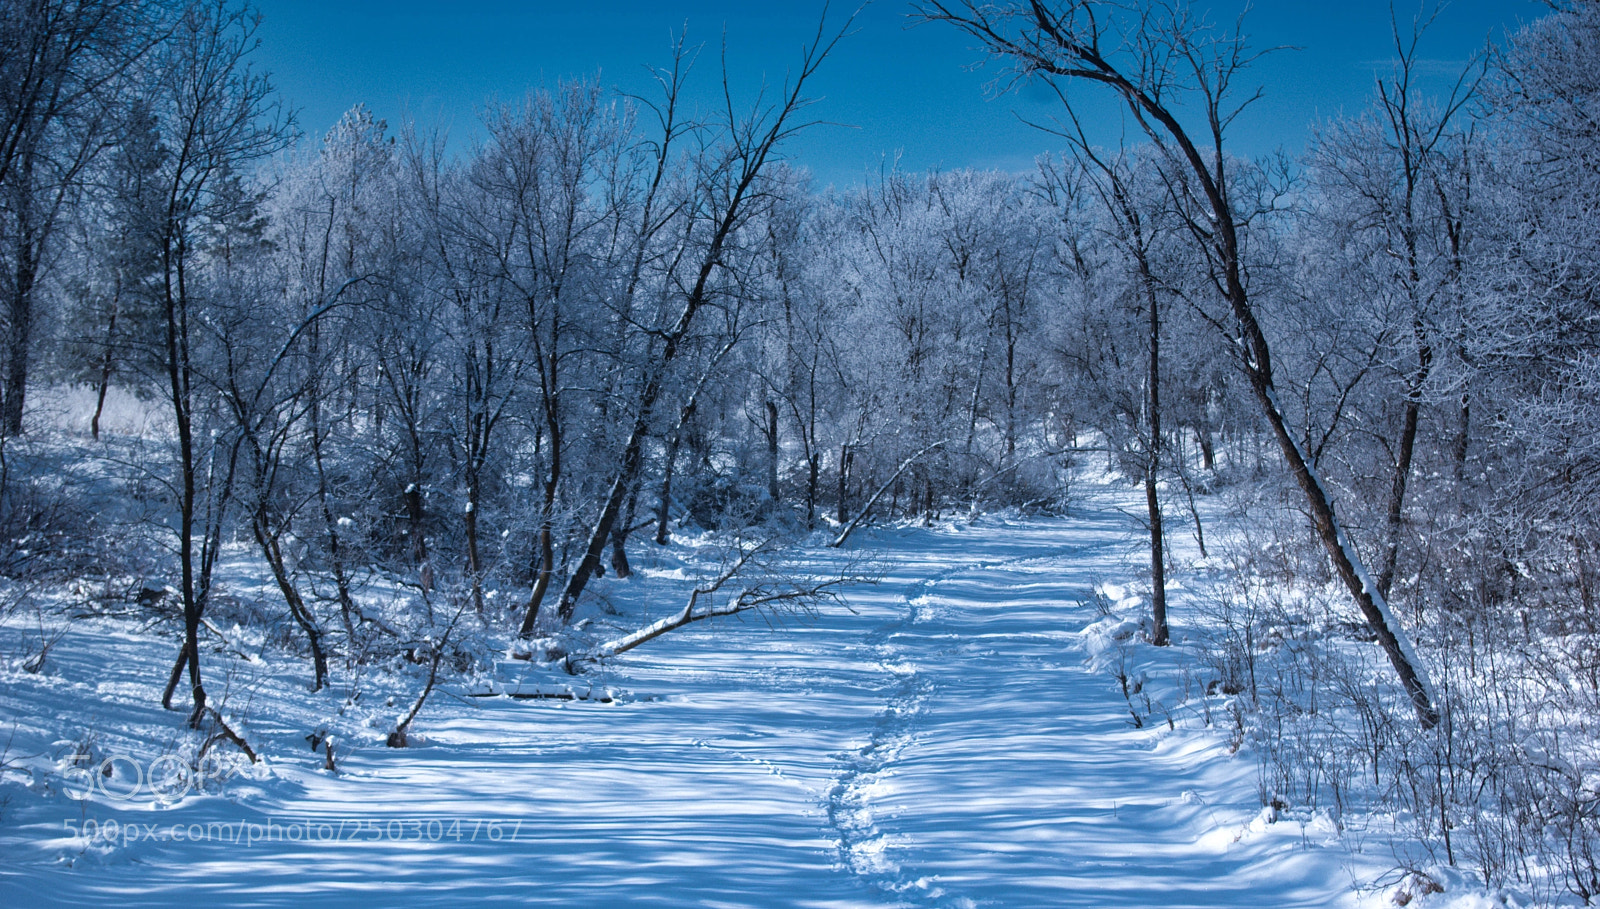 Pentax K-3 II sample photo. Down the frozen river photography